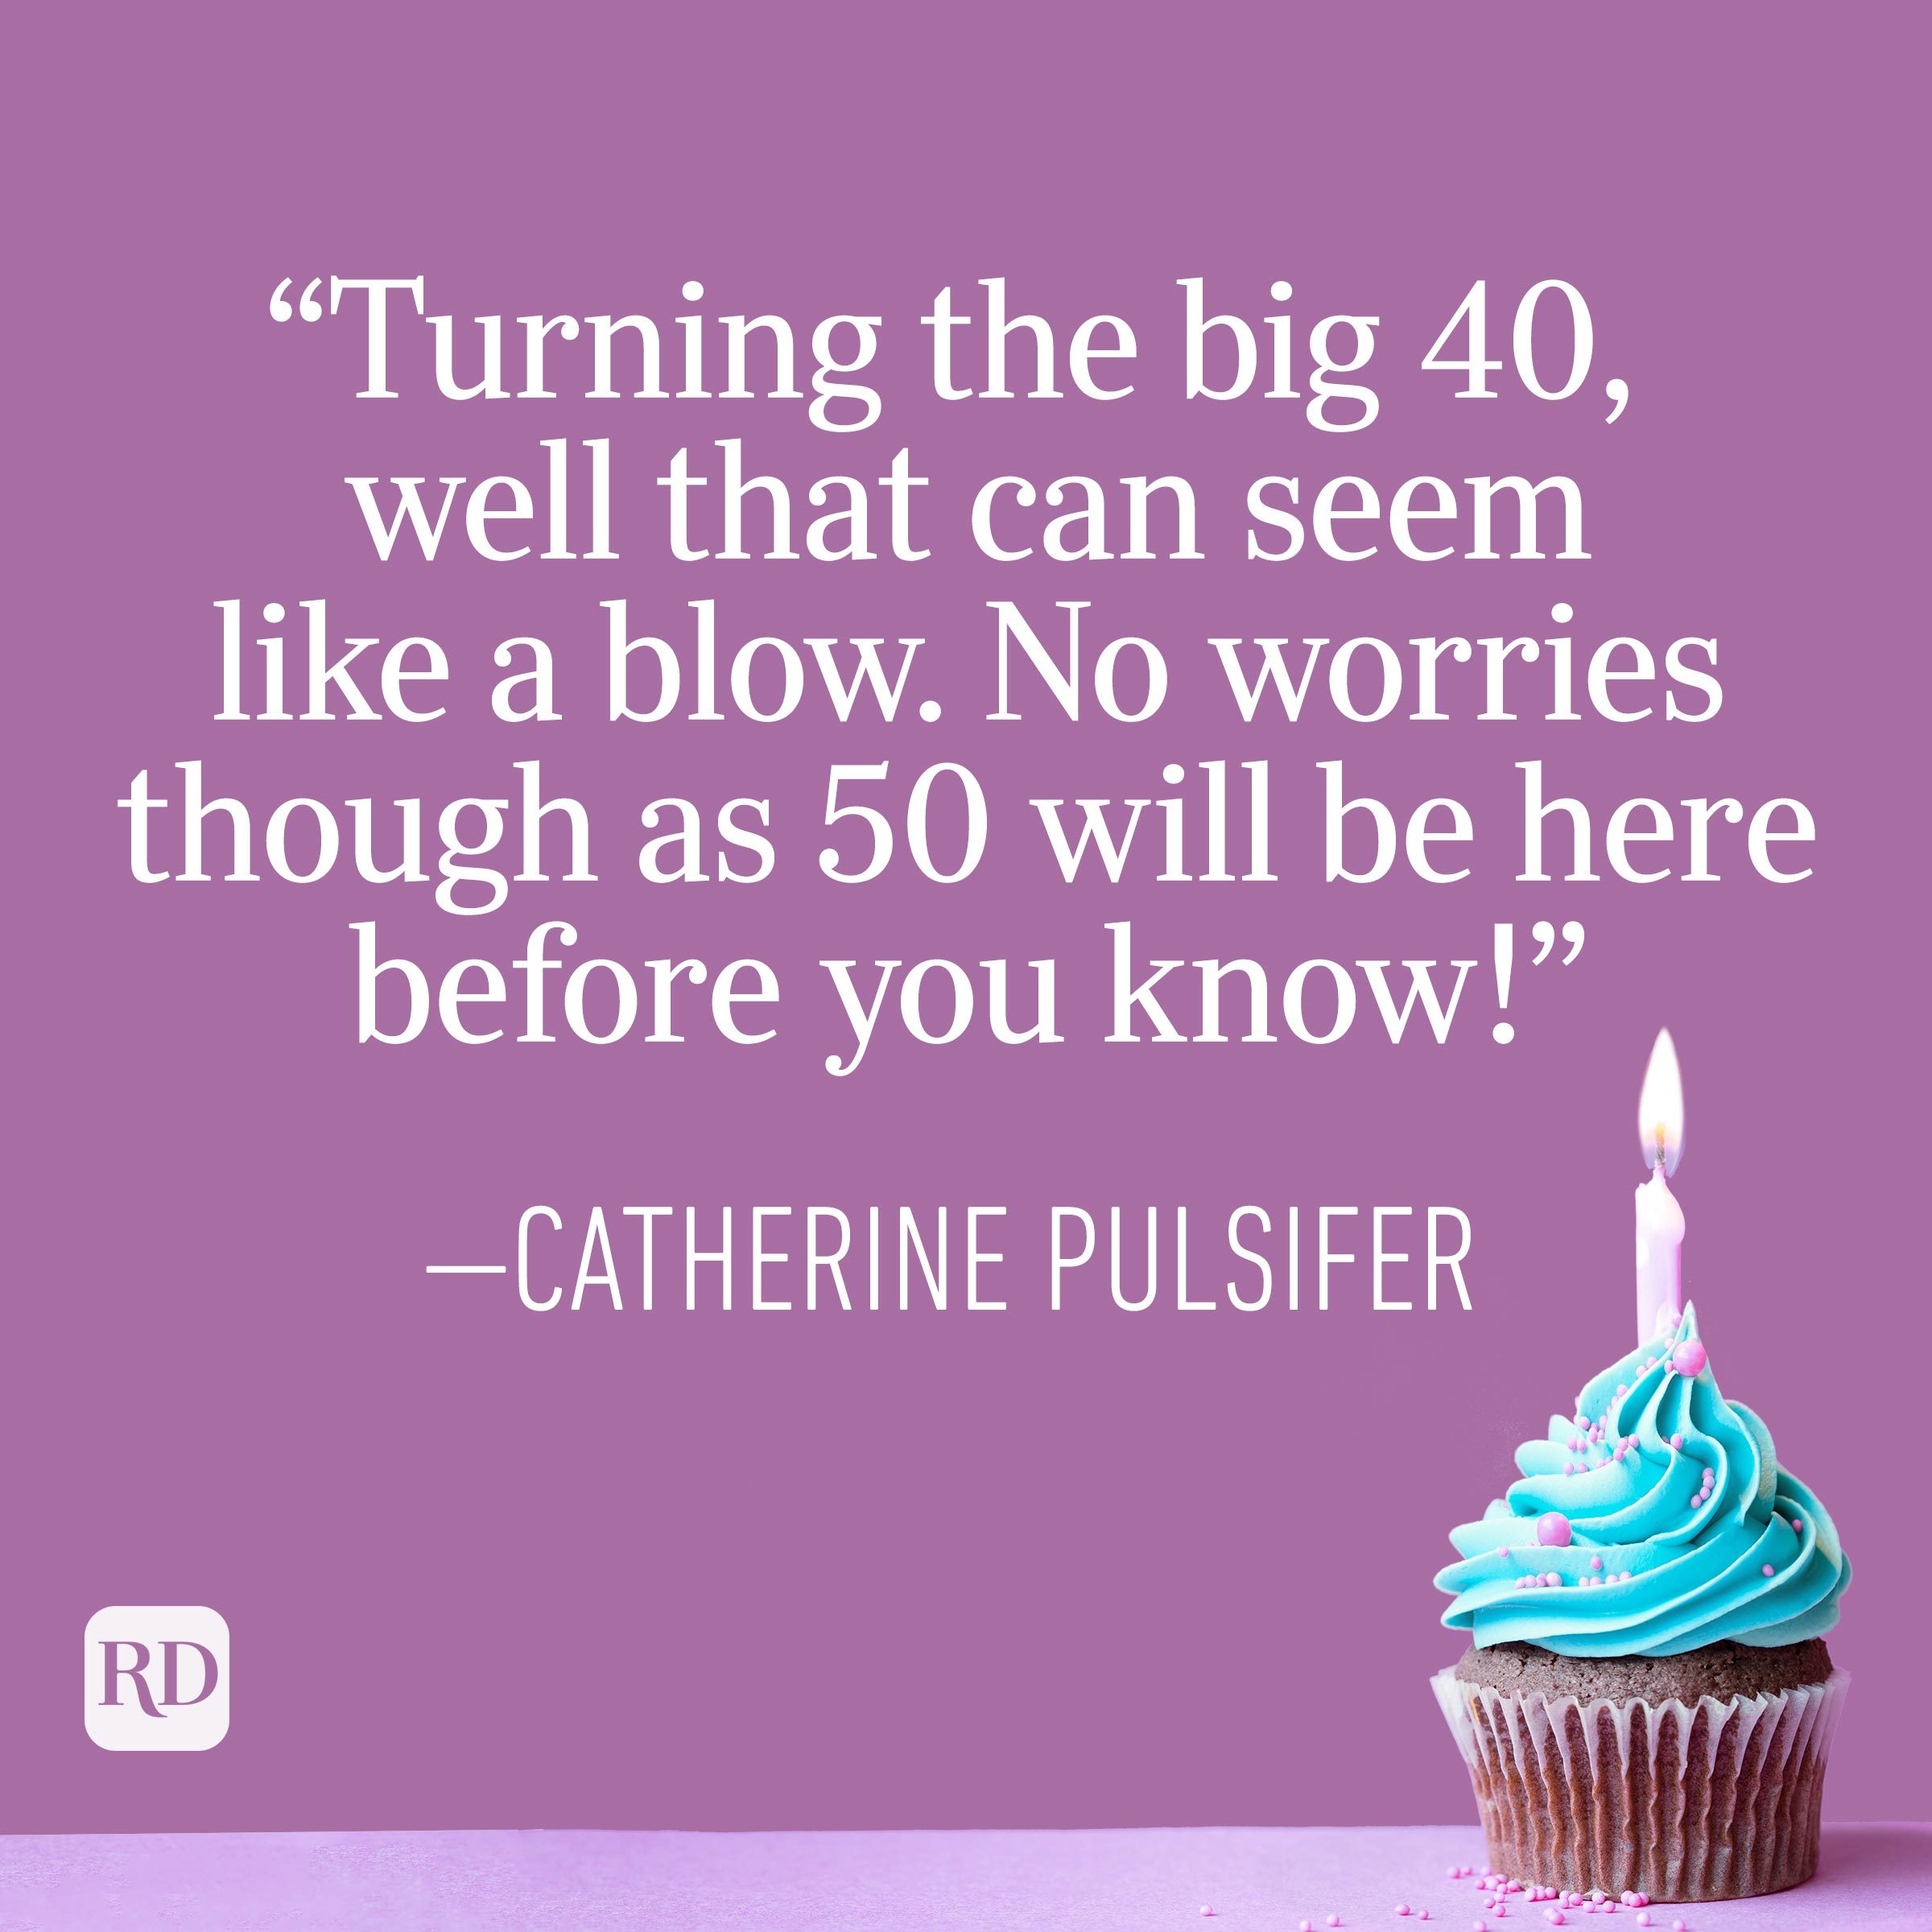 "Turning the big 40, well that can seem like a blow. No worries though as 50 will be here before you know!" —Catherine Pulsifer